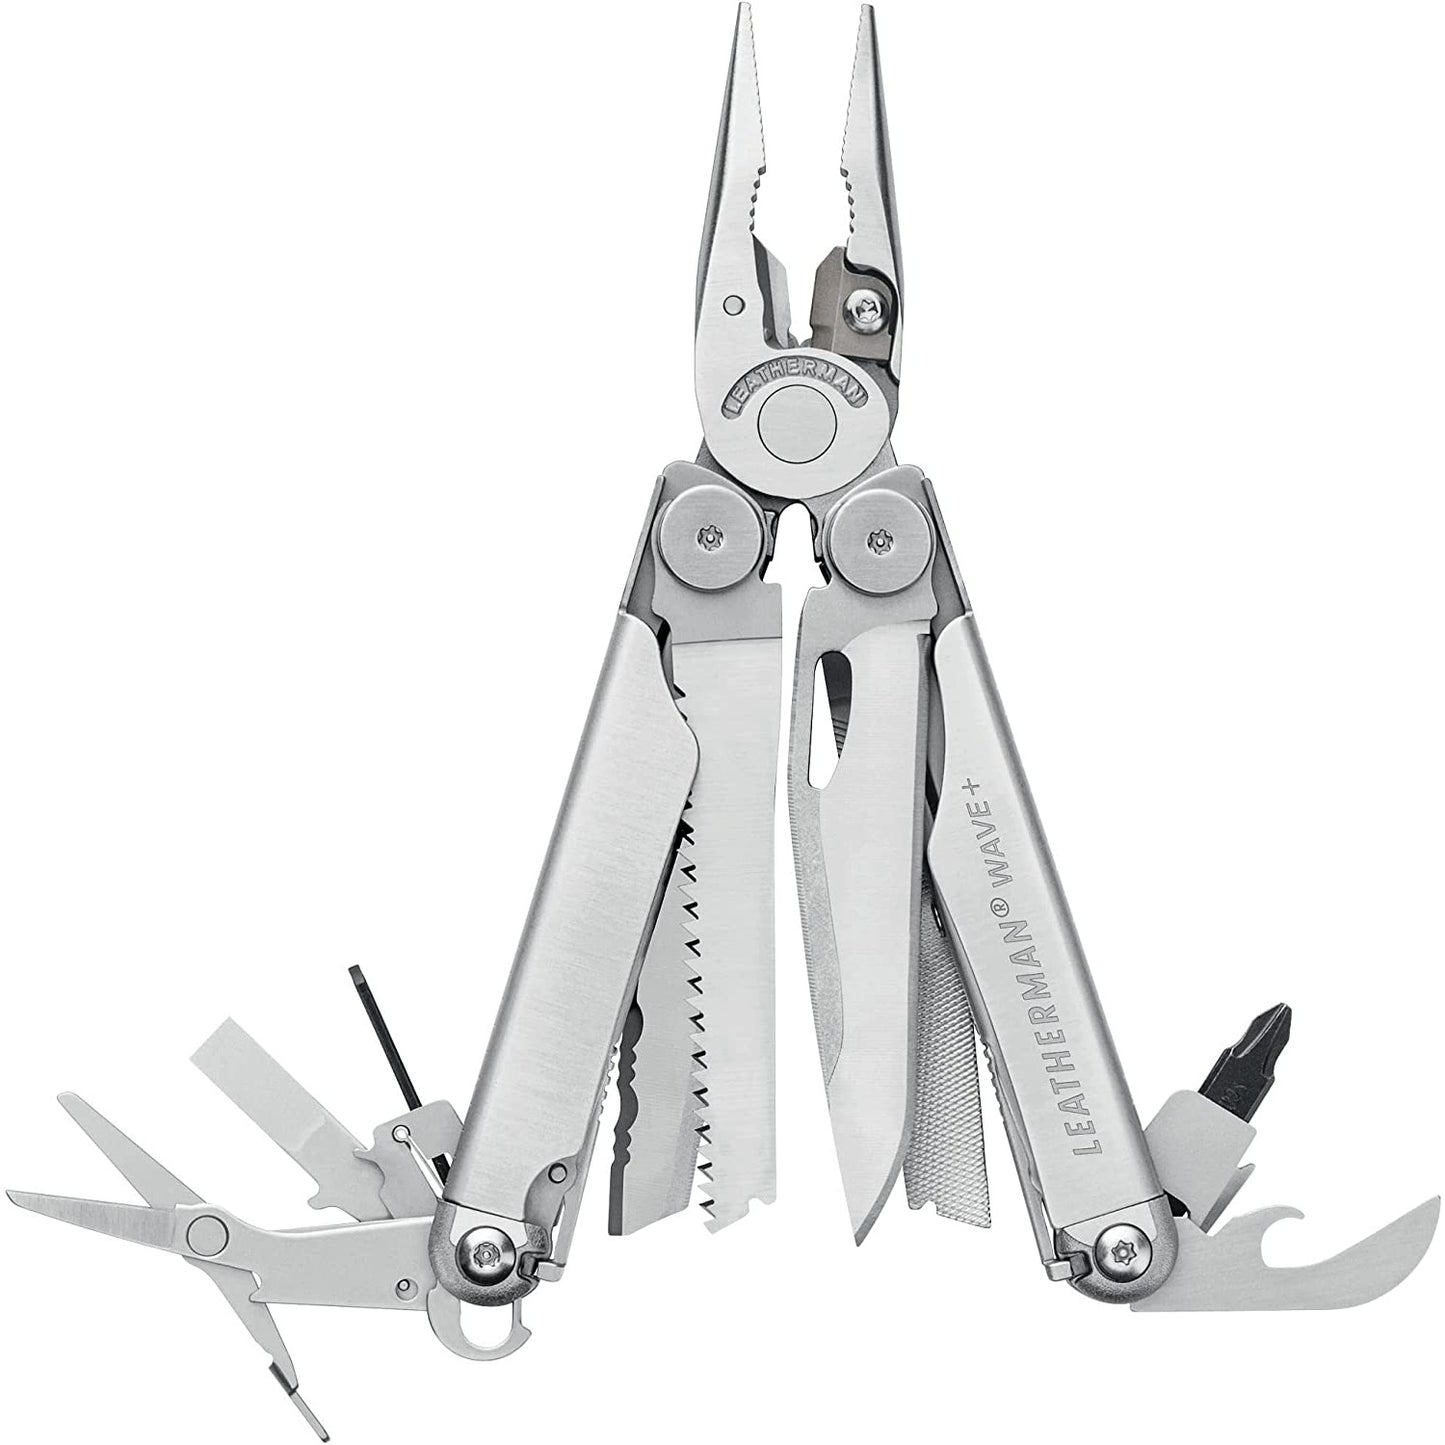 An 18-in-one pocket toolkit by Leatherman.